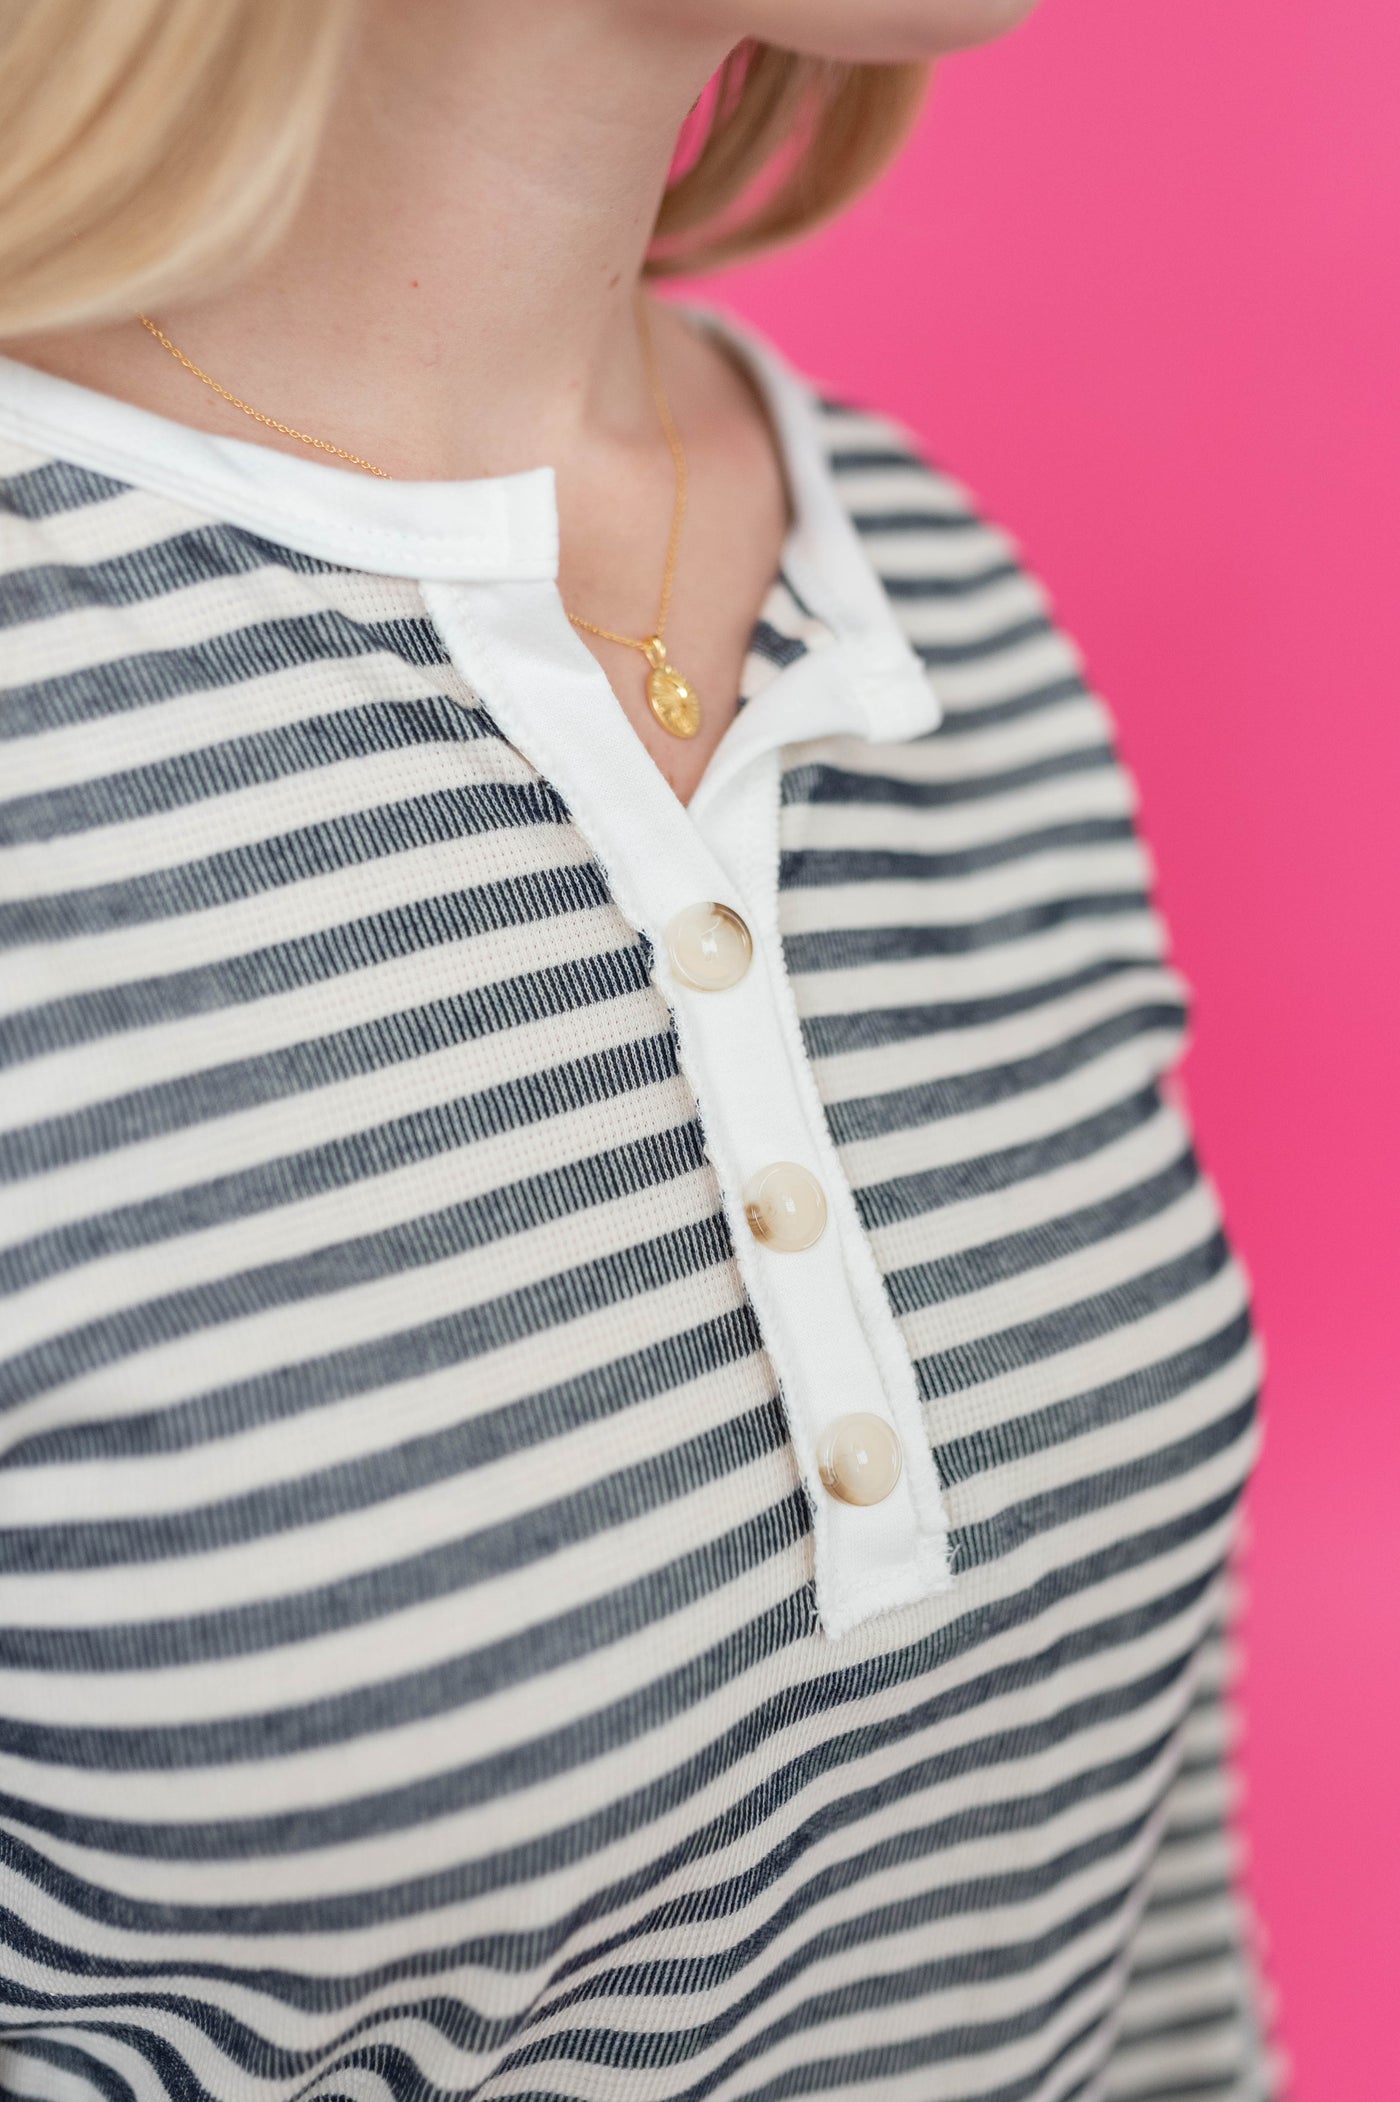 Button detail on a navy striped top